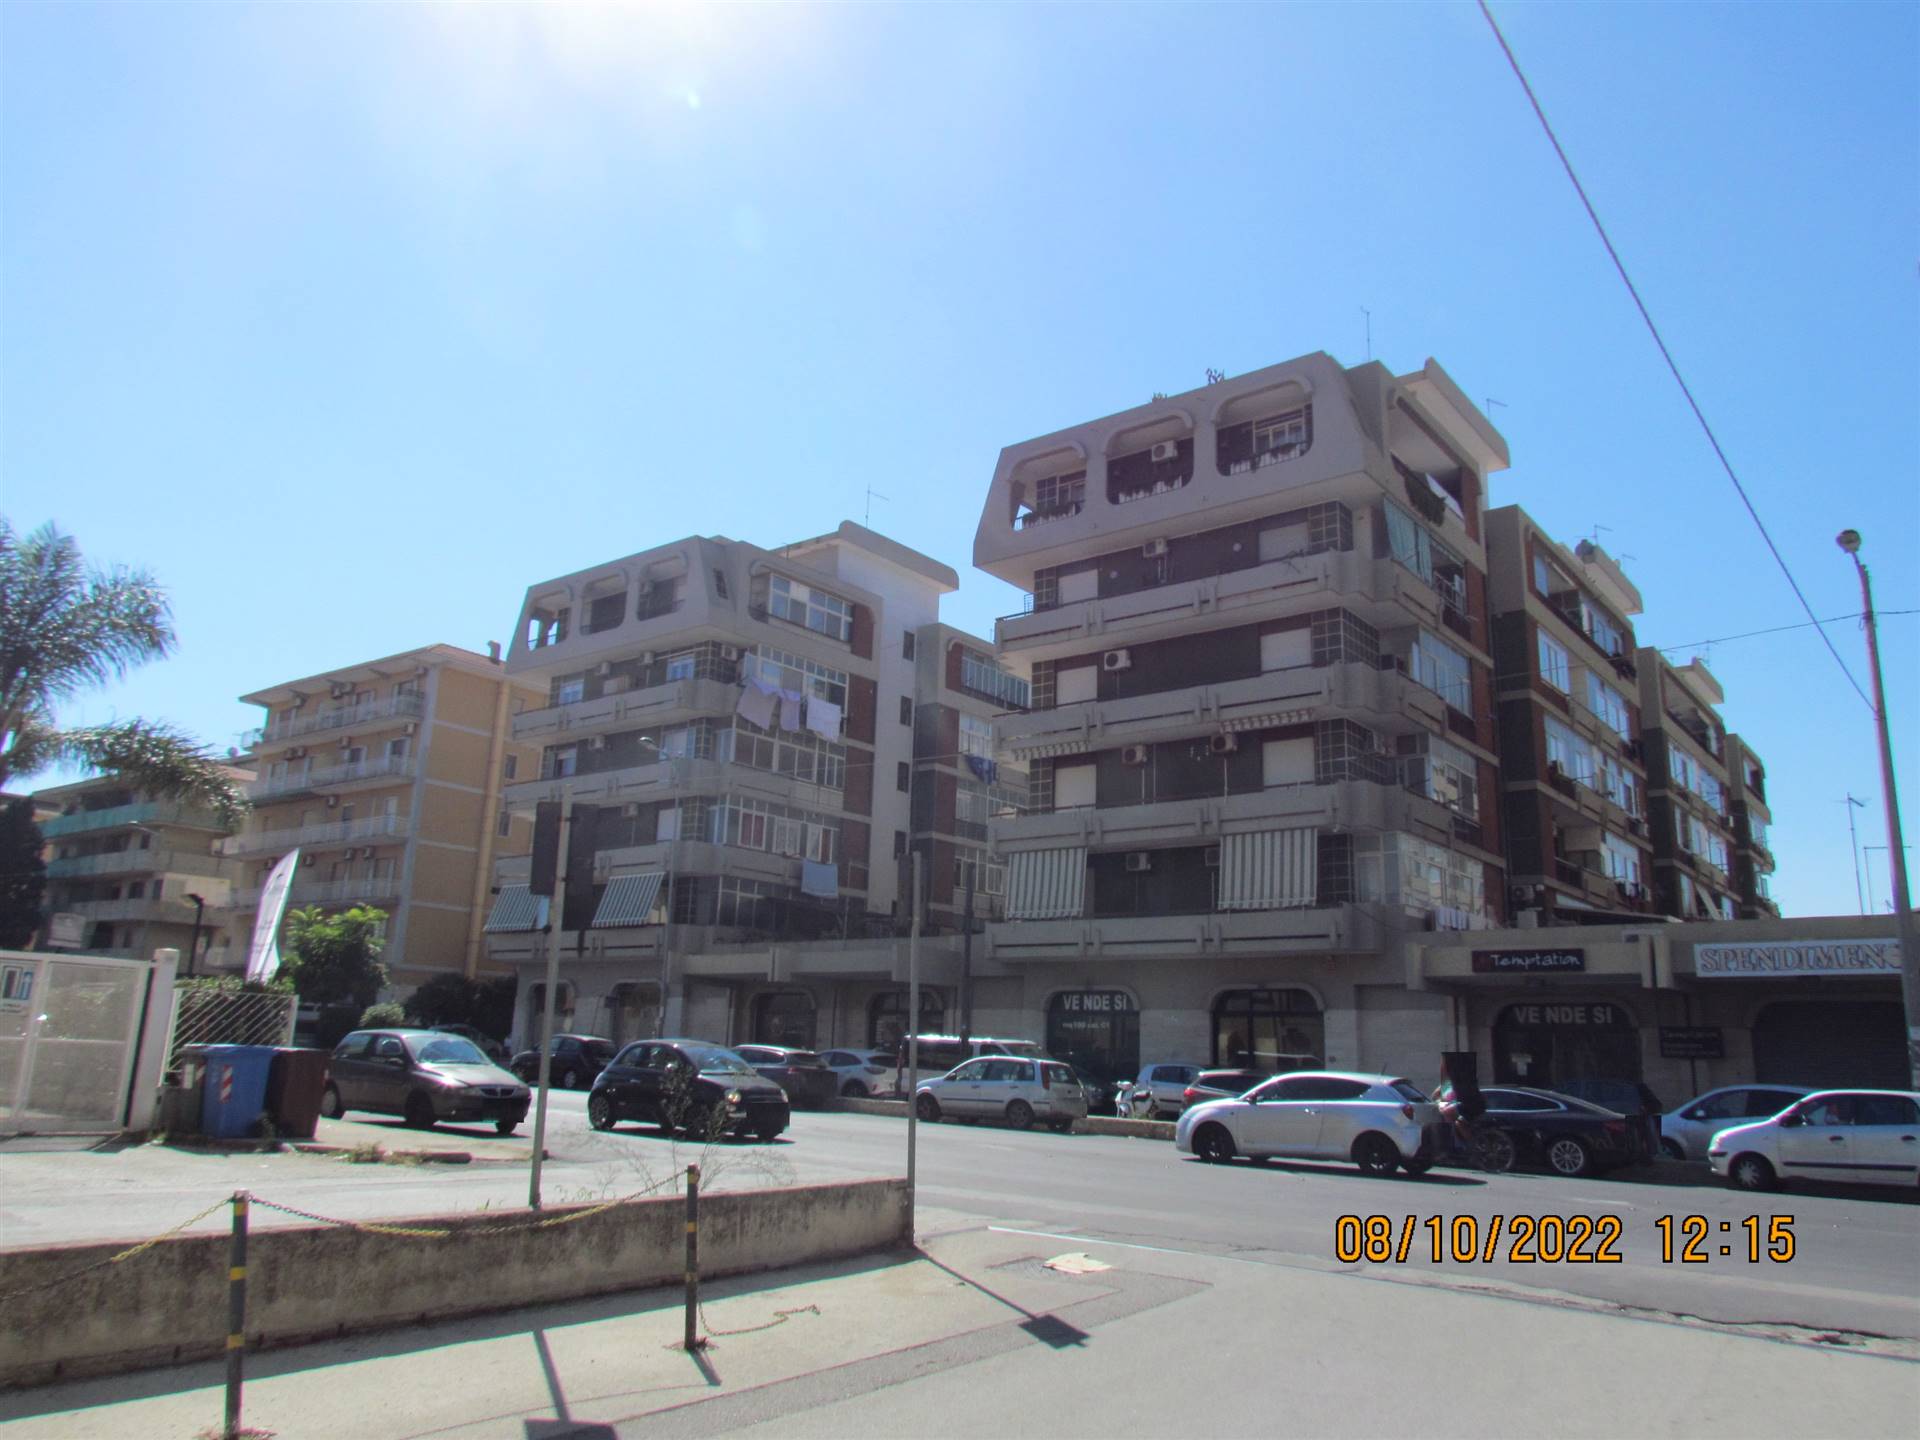 We have a 122 sqm apartment, located on the fifth floor and cosisting of: entrance hall, living room, two bedrooms, kitchen and bathroom. With a 87 